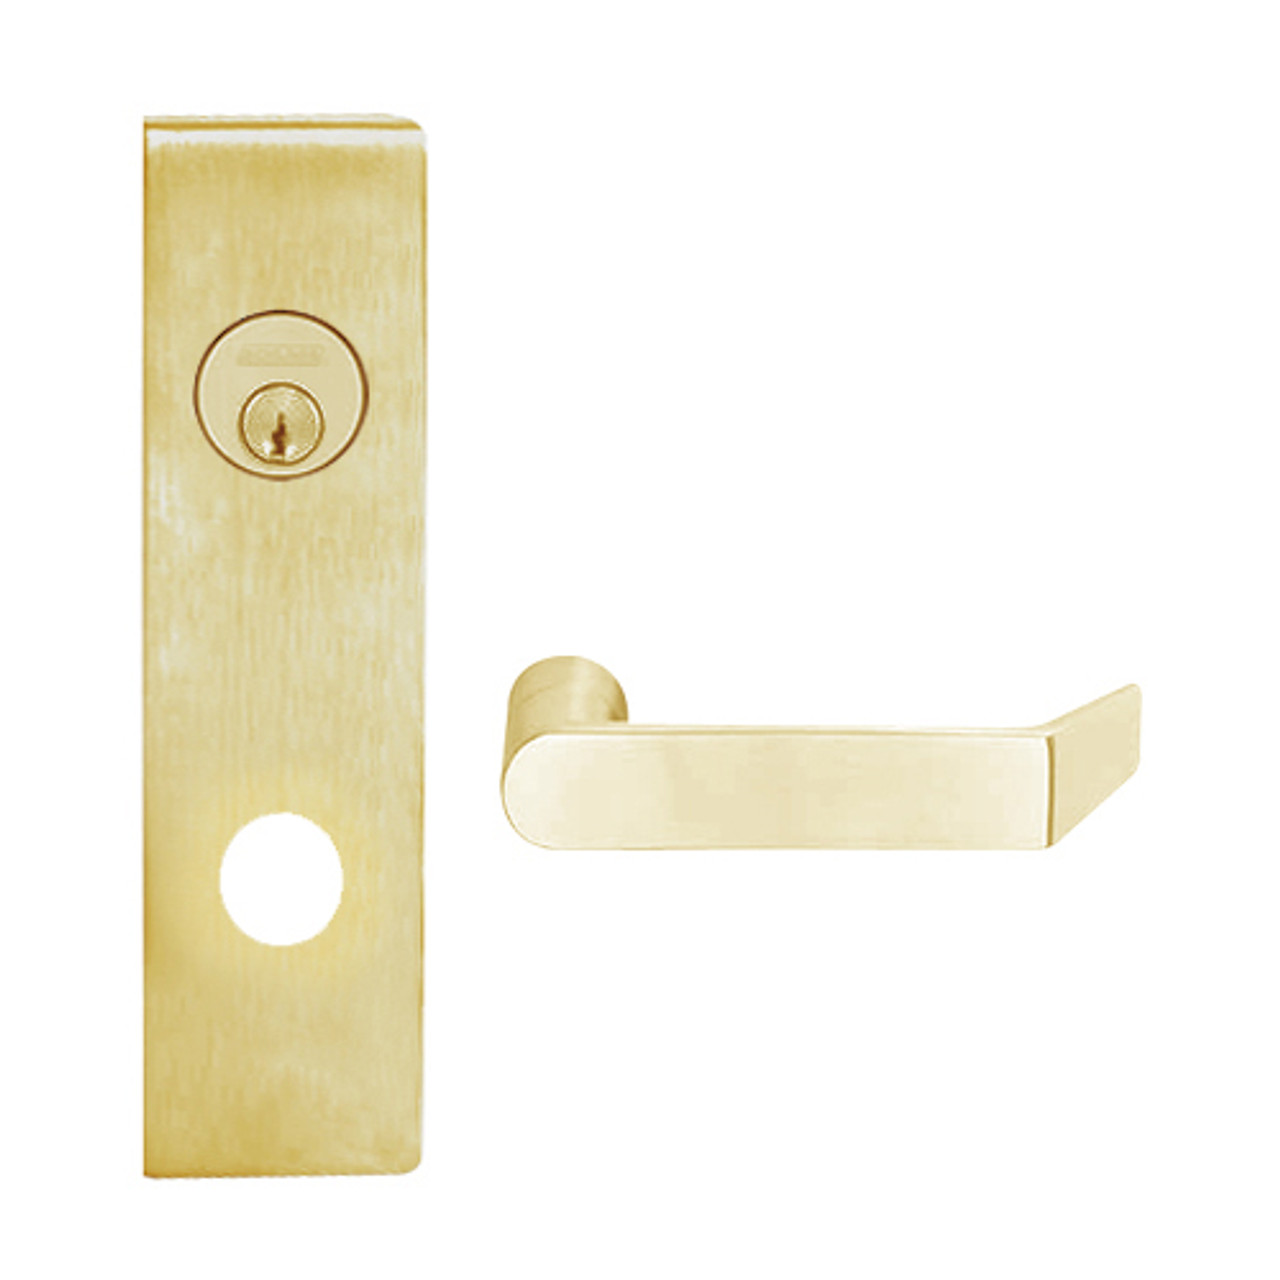 L9026L-06N-606 Schlage L Series Less Cylinder Exit Lock with Cylinder Commercial Mortise Lock with 06 Cast Lever Design in Satin Brass